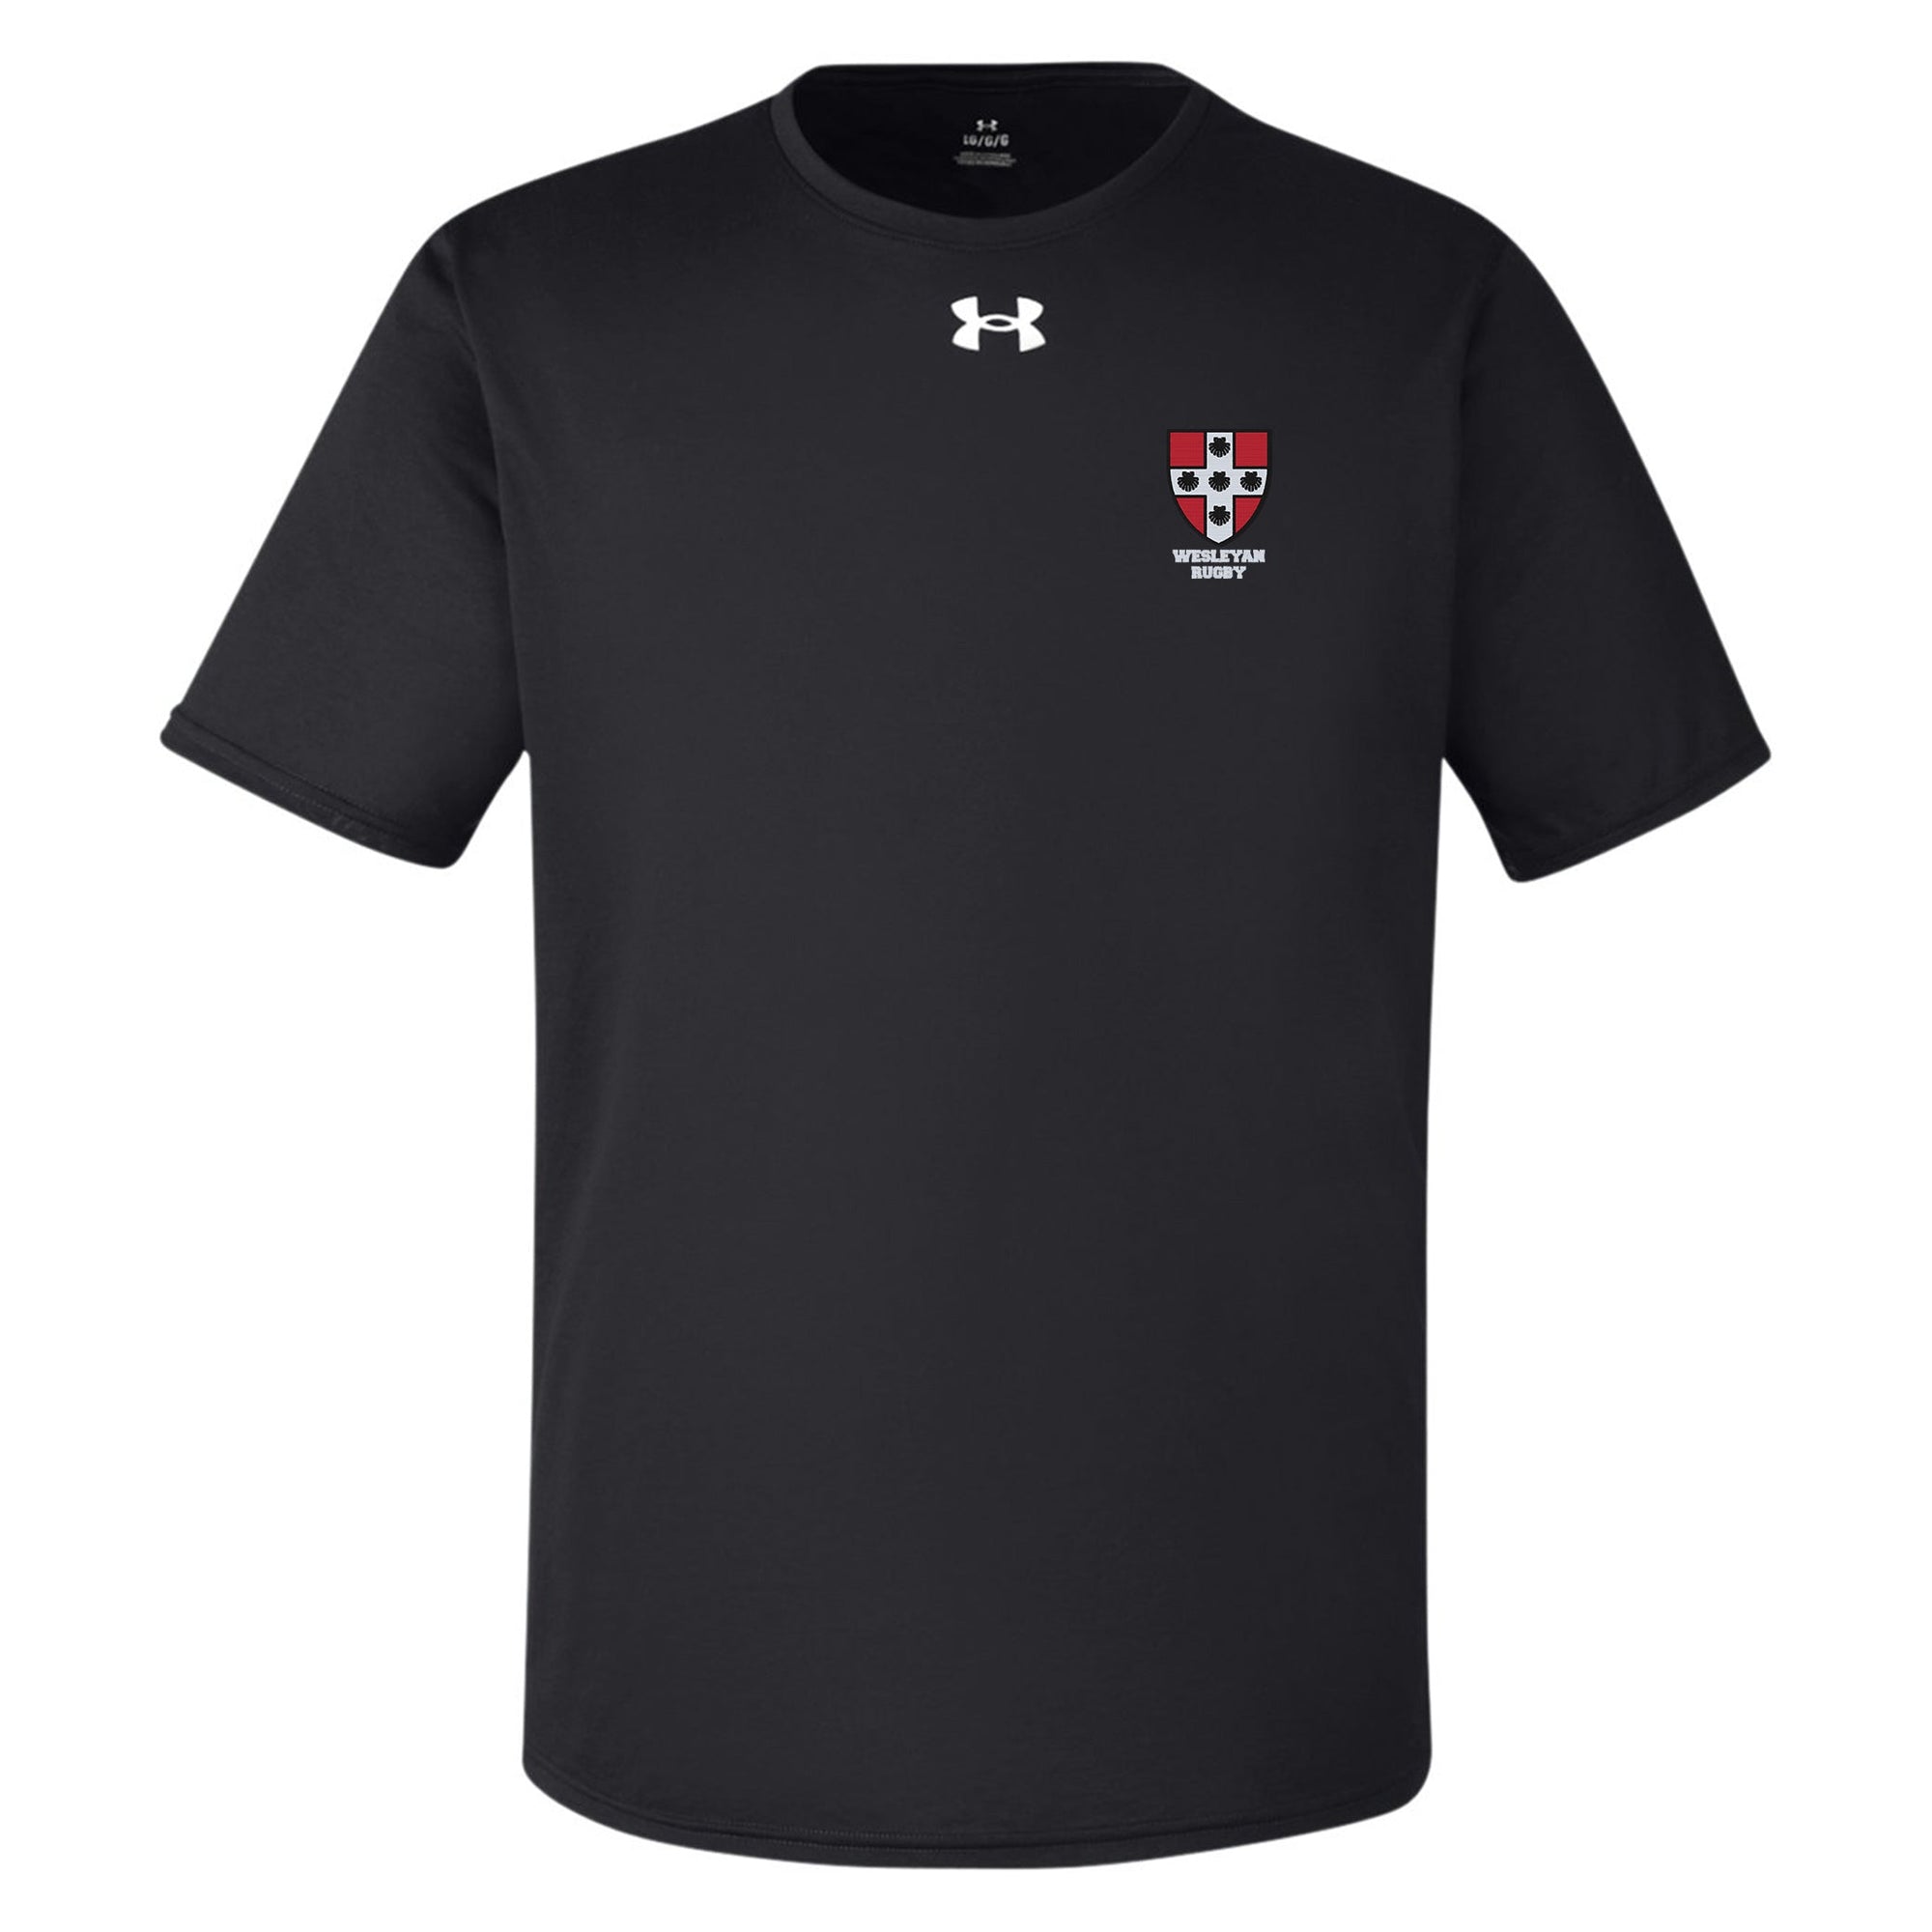 Rugby Imports Wesleyan Rugby Tech T-Shirt